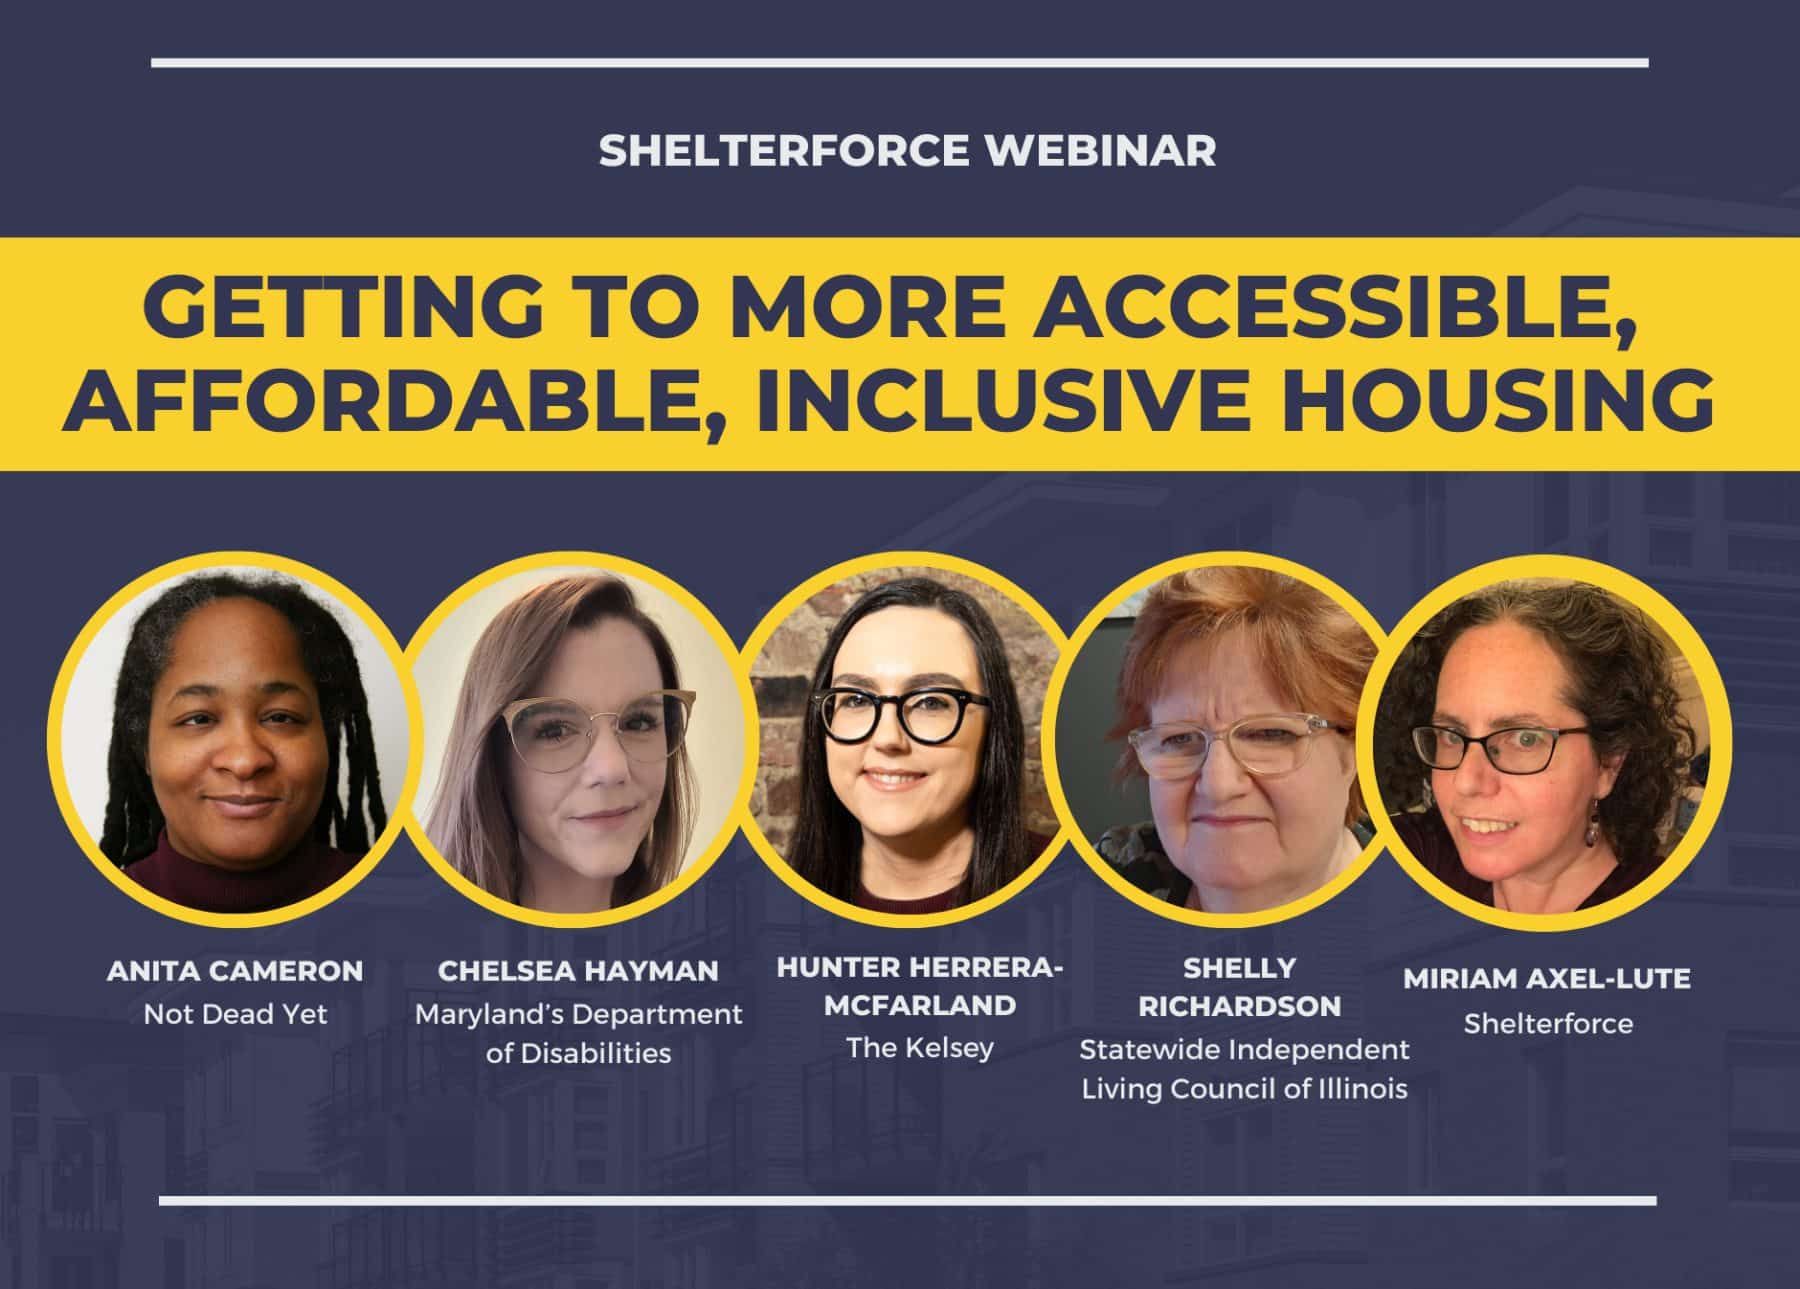 Image description: Webinar title “Getting to More Accessible, Affordable, Inclusive Housing" in a yellow banner.Below, from left to right are headshots of the speakers: Anita Cameron a woman with brown skin and dredlocks, Chelsea Hayman, a woman with pale skin, straight light-brown hair and glasses, Hunter Herrera-McFarland, a woman with long straight black hair, dark-framed glasses and light skin, Shelly Richardson, a woman with short reddish hair, clear-framed glasses, and Miriam Axel-Lute, a woman with curly dark medium-length hair, angular purple glasses and earrings.